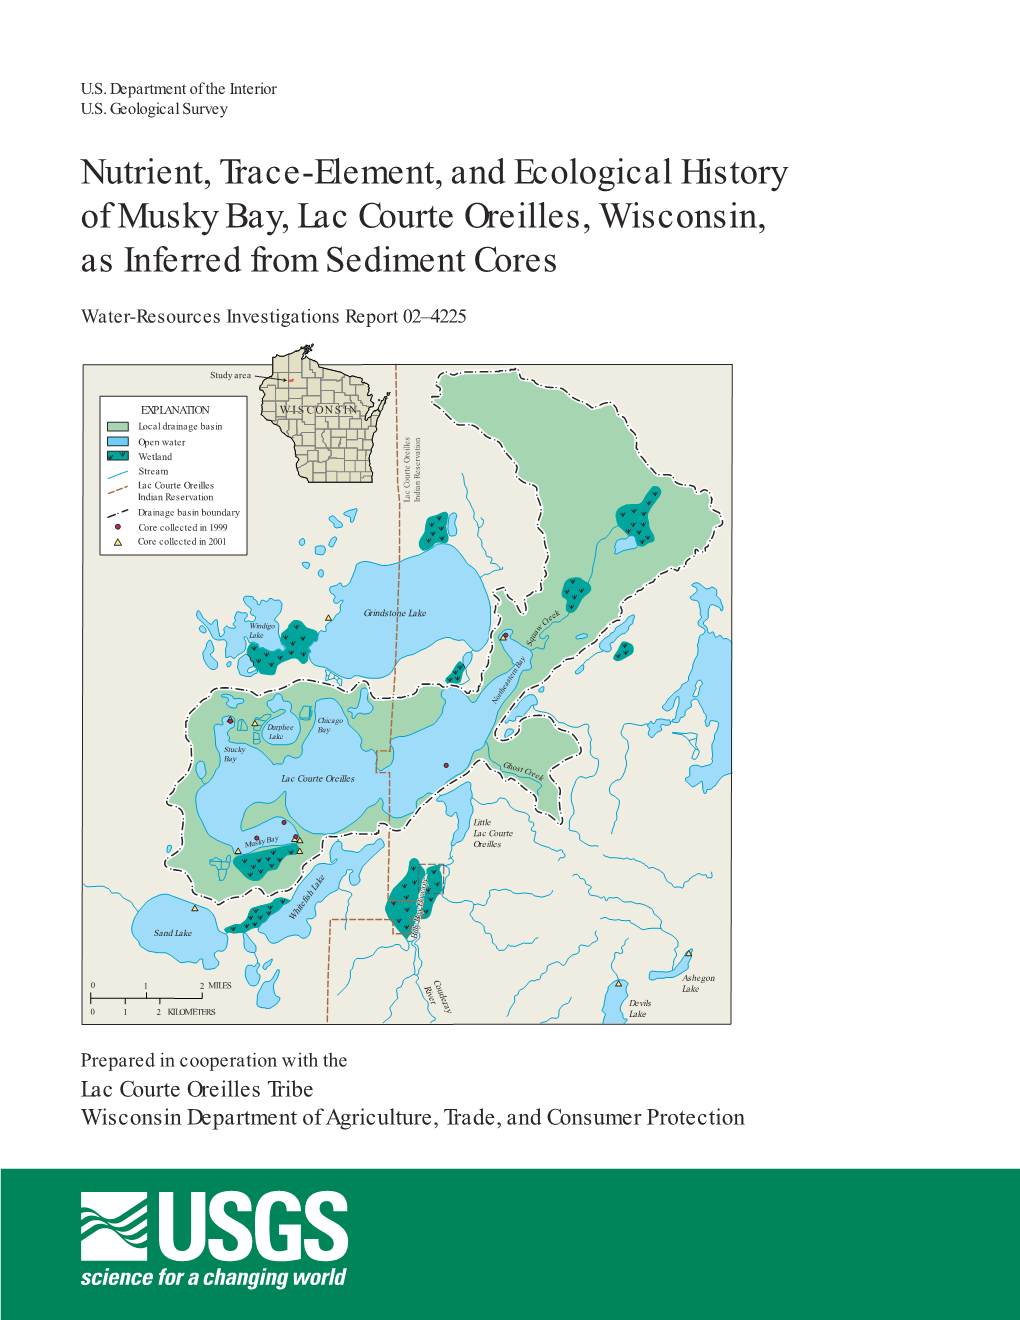 Nutrient, Trace-Element, and Ecological History of Musky Bay, Lac Courte Oreilles, Wisconsin, As Inferred from Sediment Cores